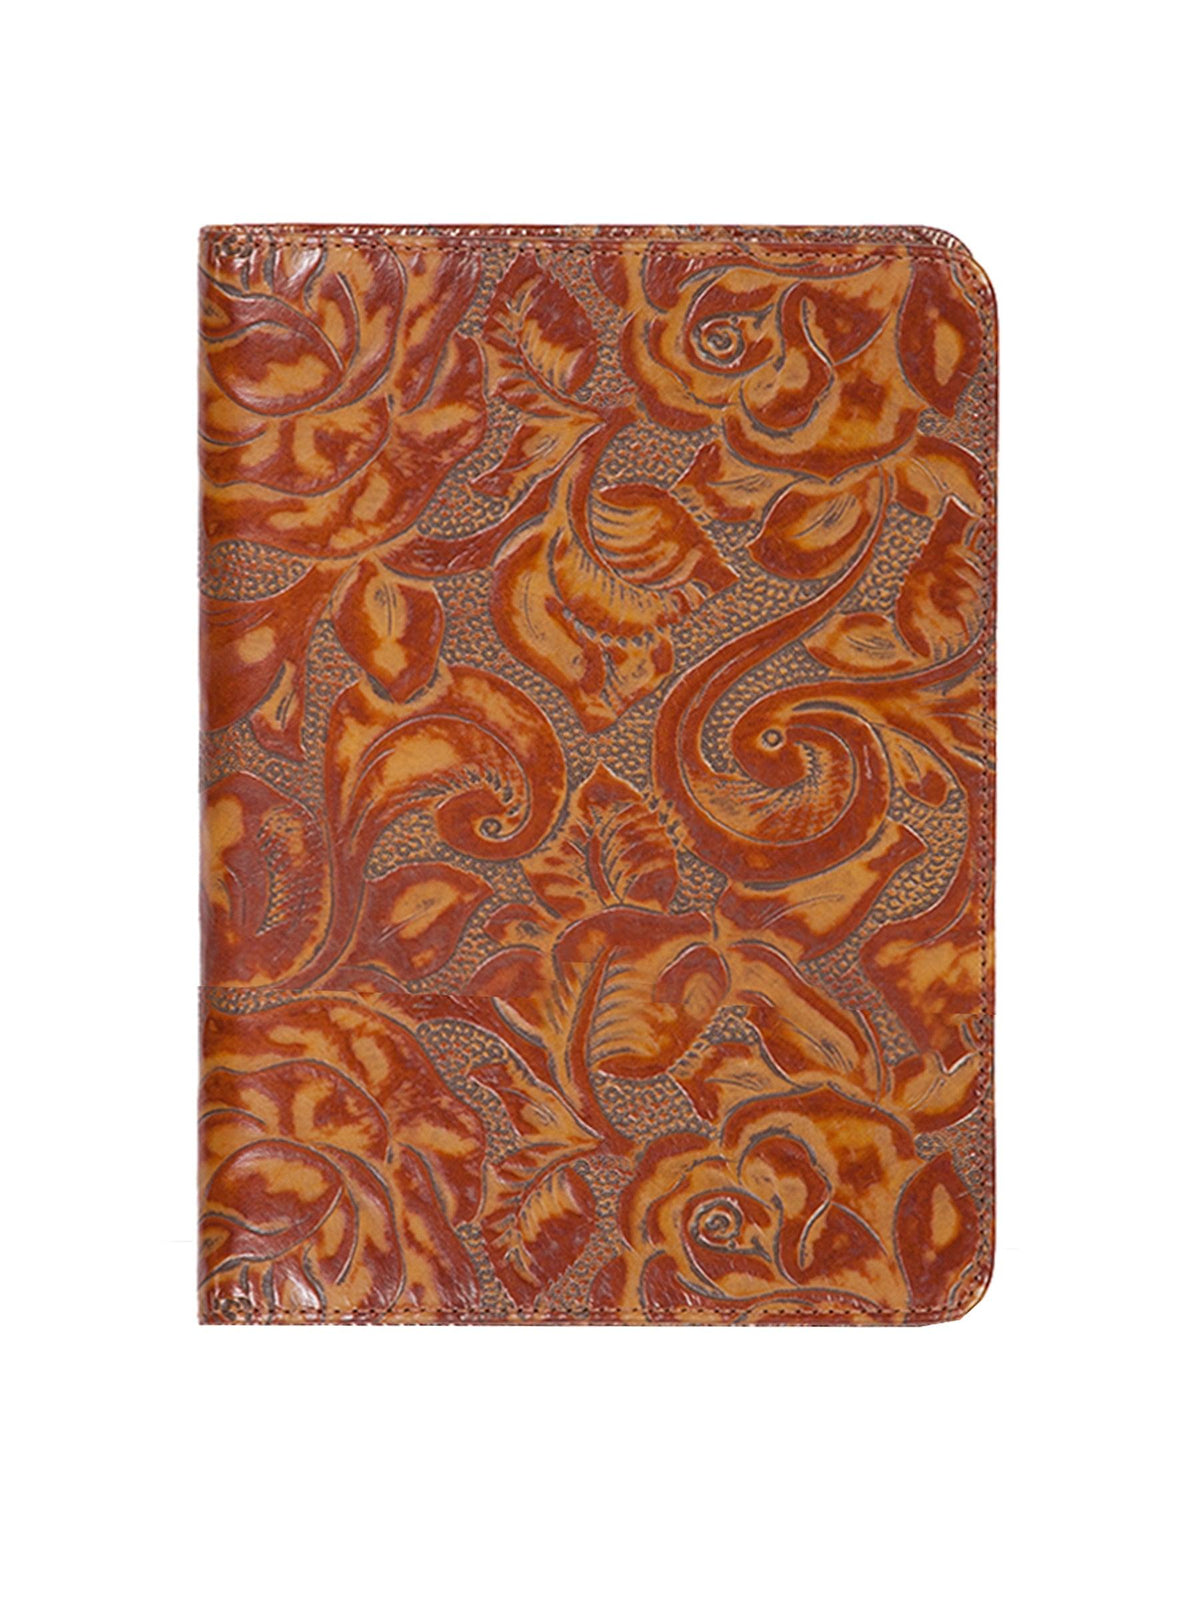 Scully Leather Chocolate New Tooled Leather Blank Manuscript - Flyclothing LLC